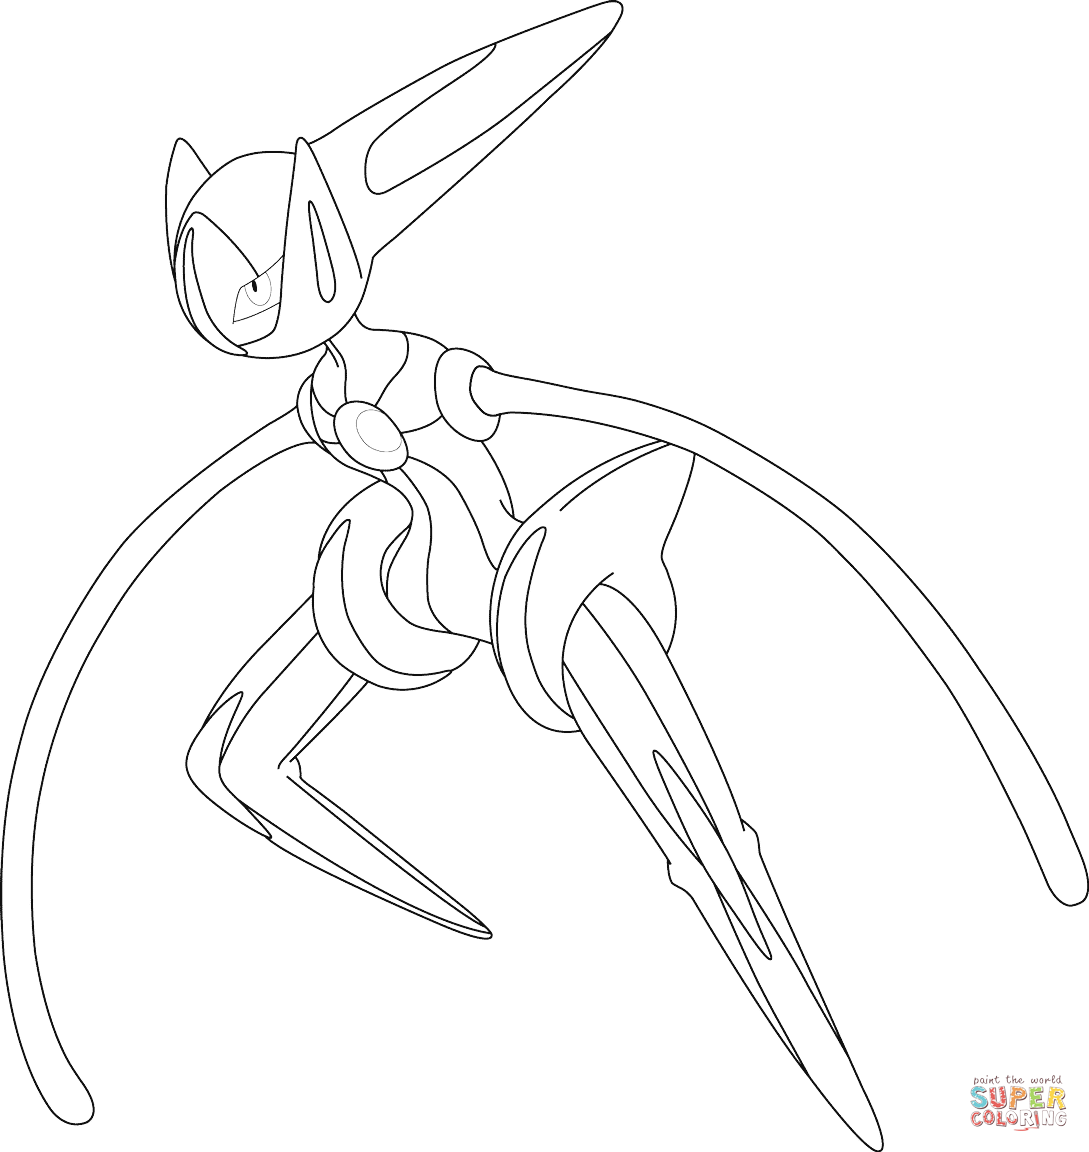 Deoxys in Speed Form coloring page | Free Printable Coloring Pages